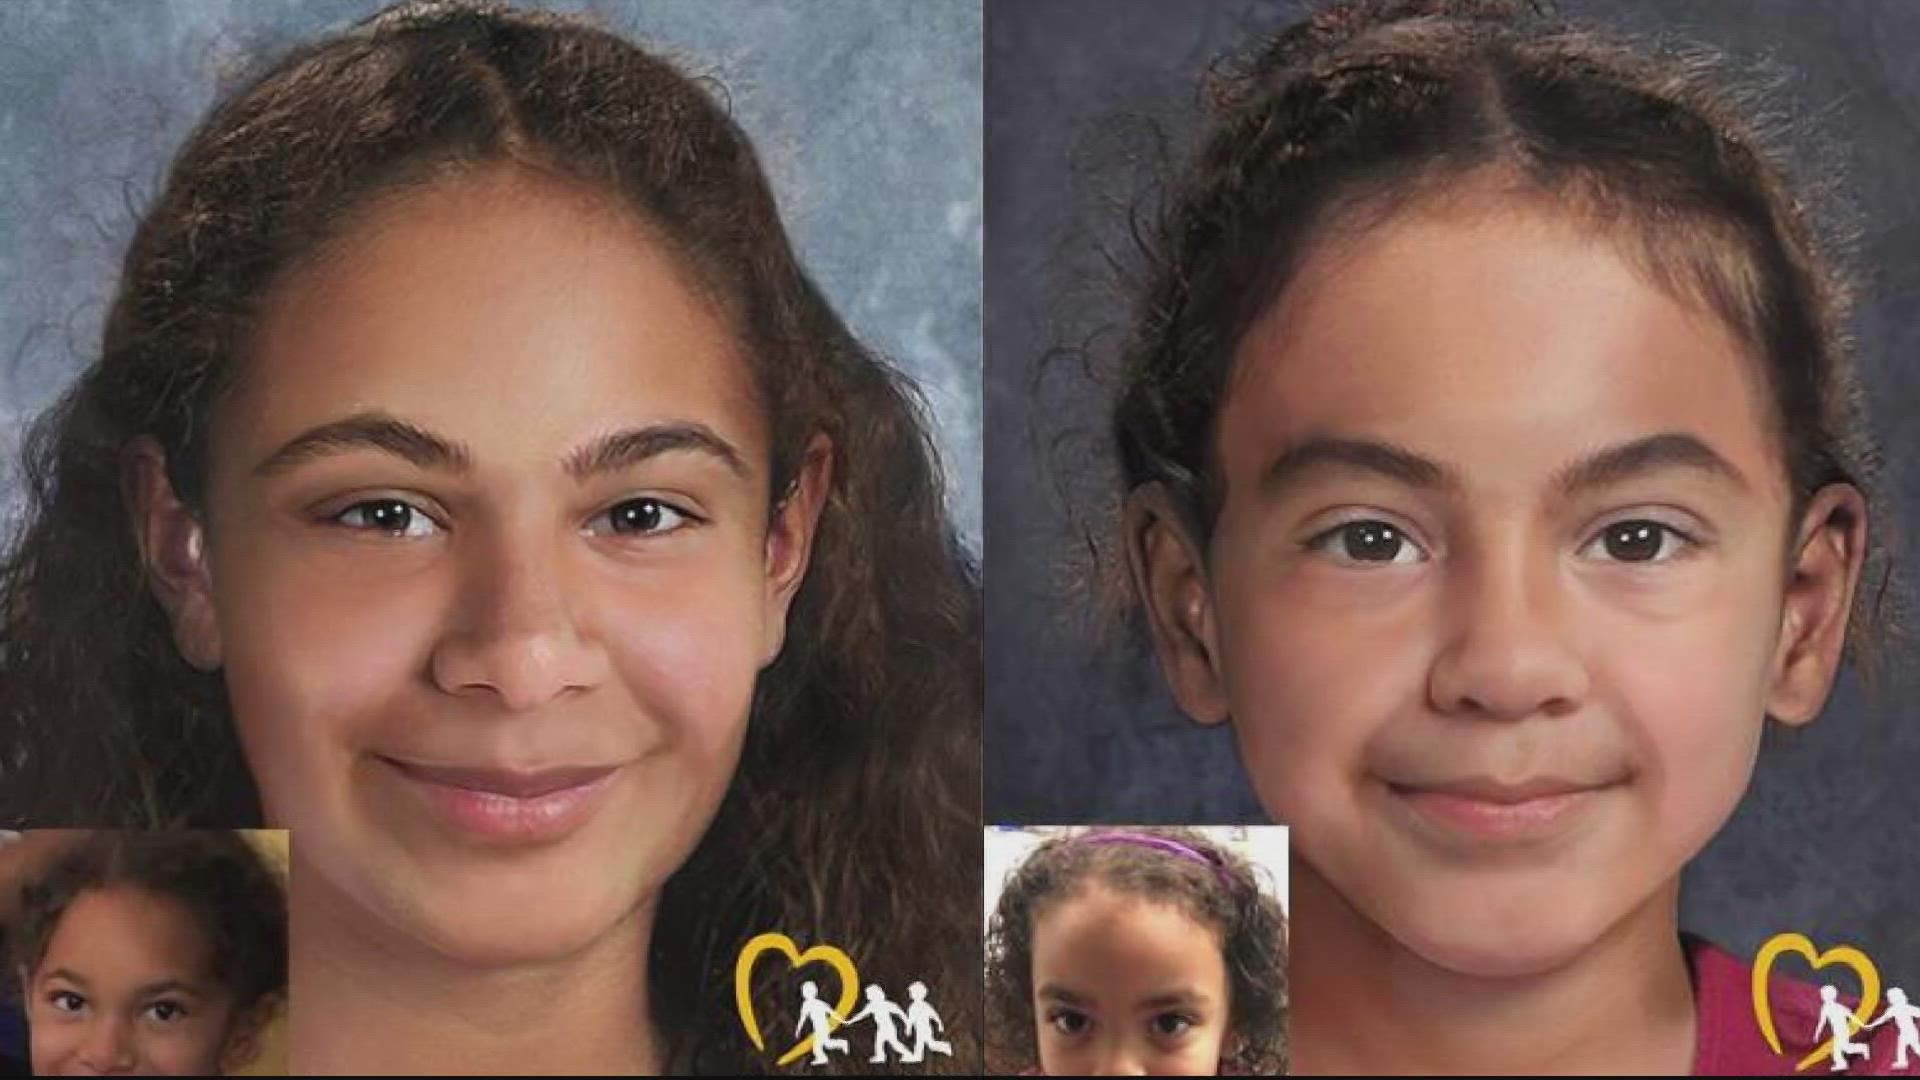 The sisters were last seen in 2020. However, new age progression photos have been released showing what the sister may look like today, at their current age